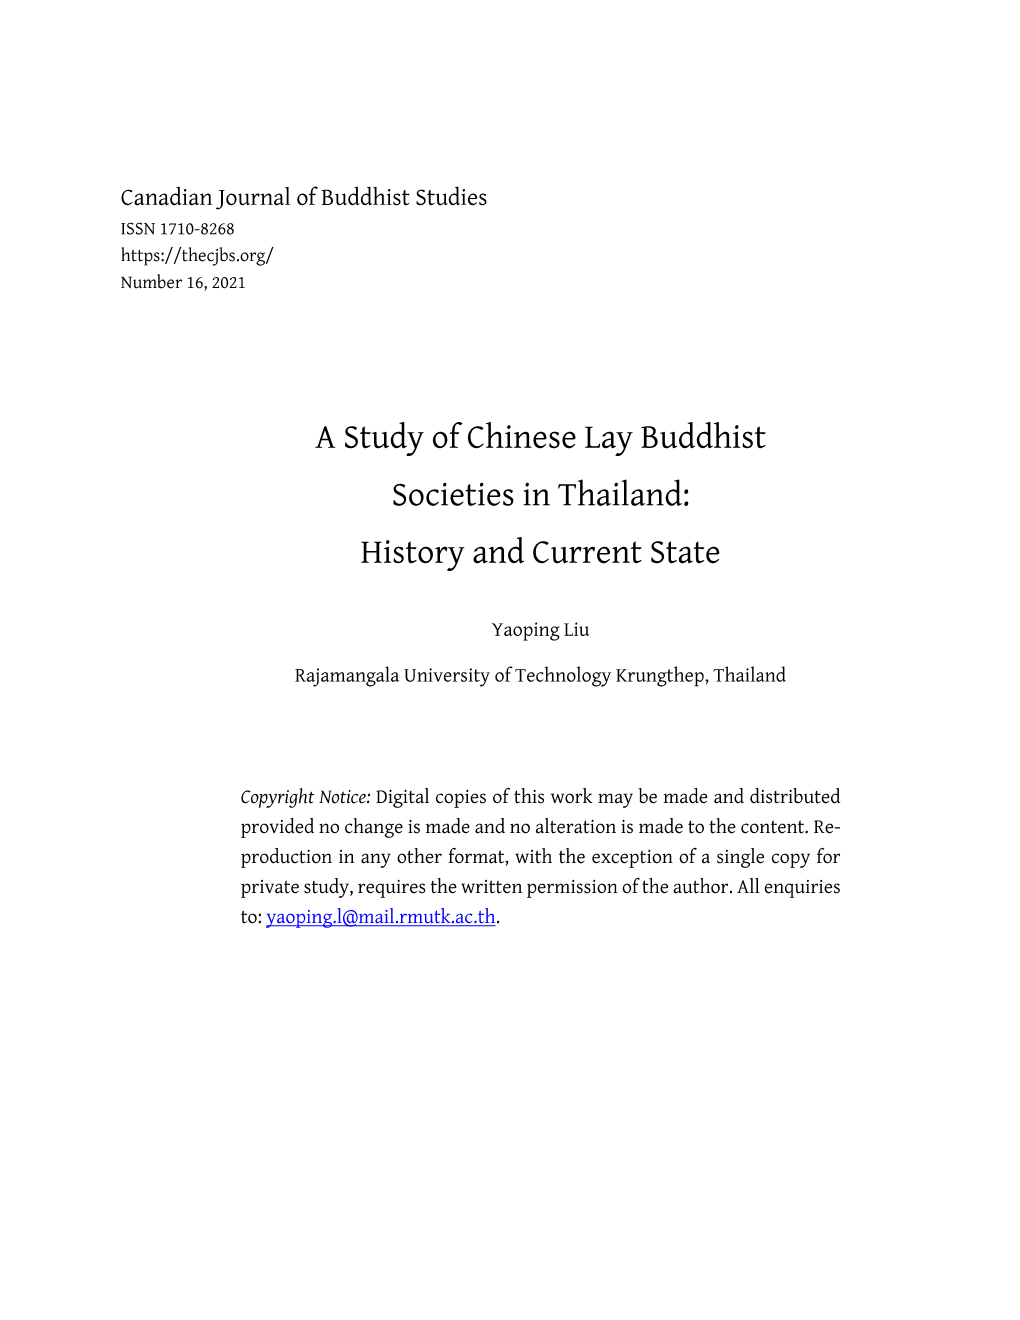 A Study of Chinese Lay Buddhist Societies in Thailand: History and Current State